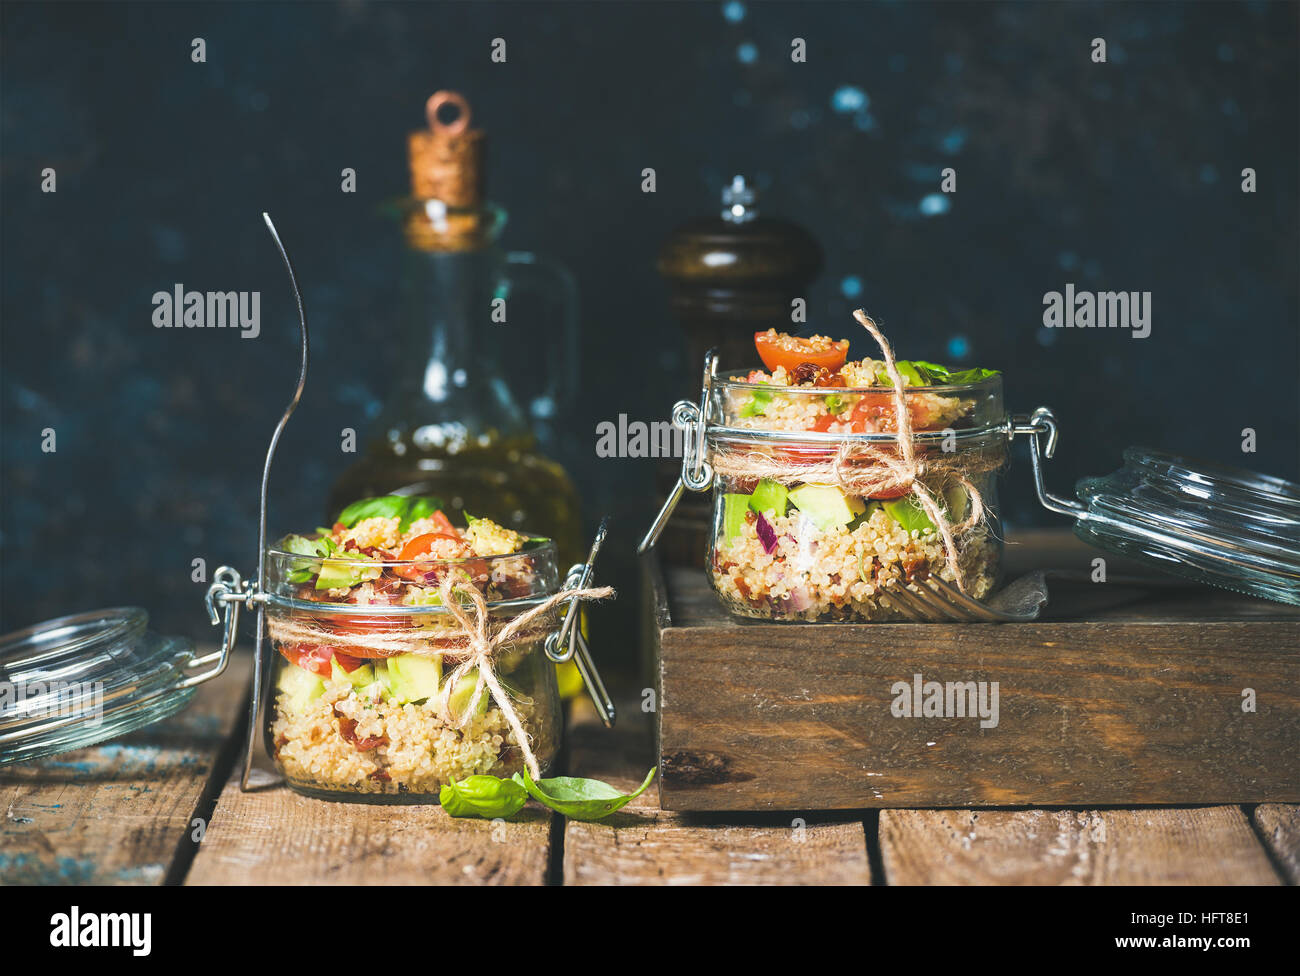 Homemade jar quinoa salad with cherry and sun-dried tomatoes, avocado and fresh basil. Detox, dieting, vegetarian, vegan, clean eating food concept. D Stock Photo